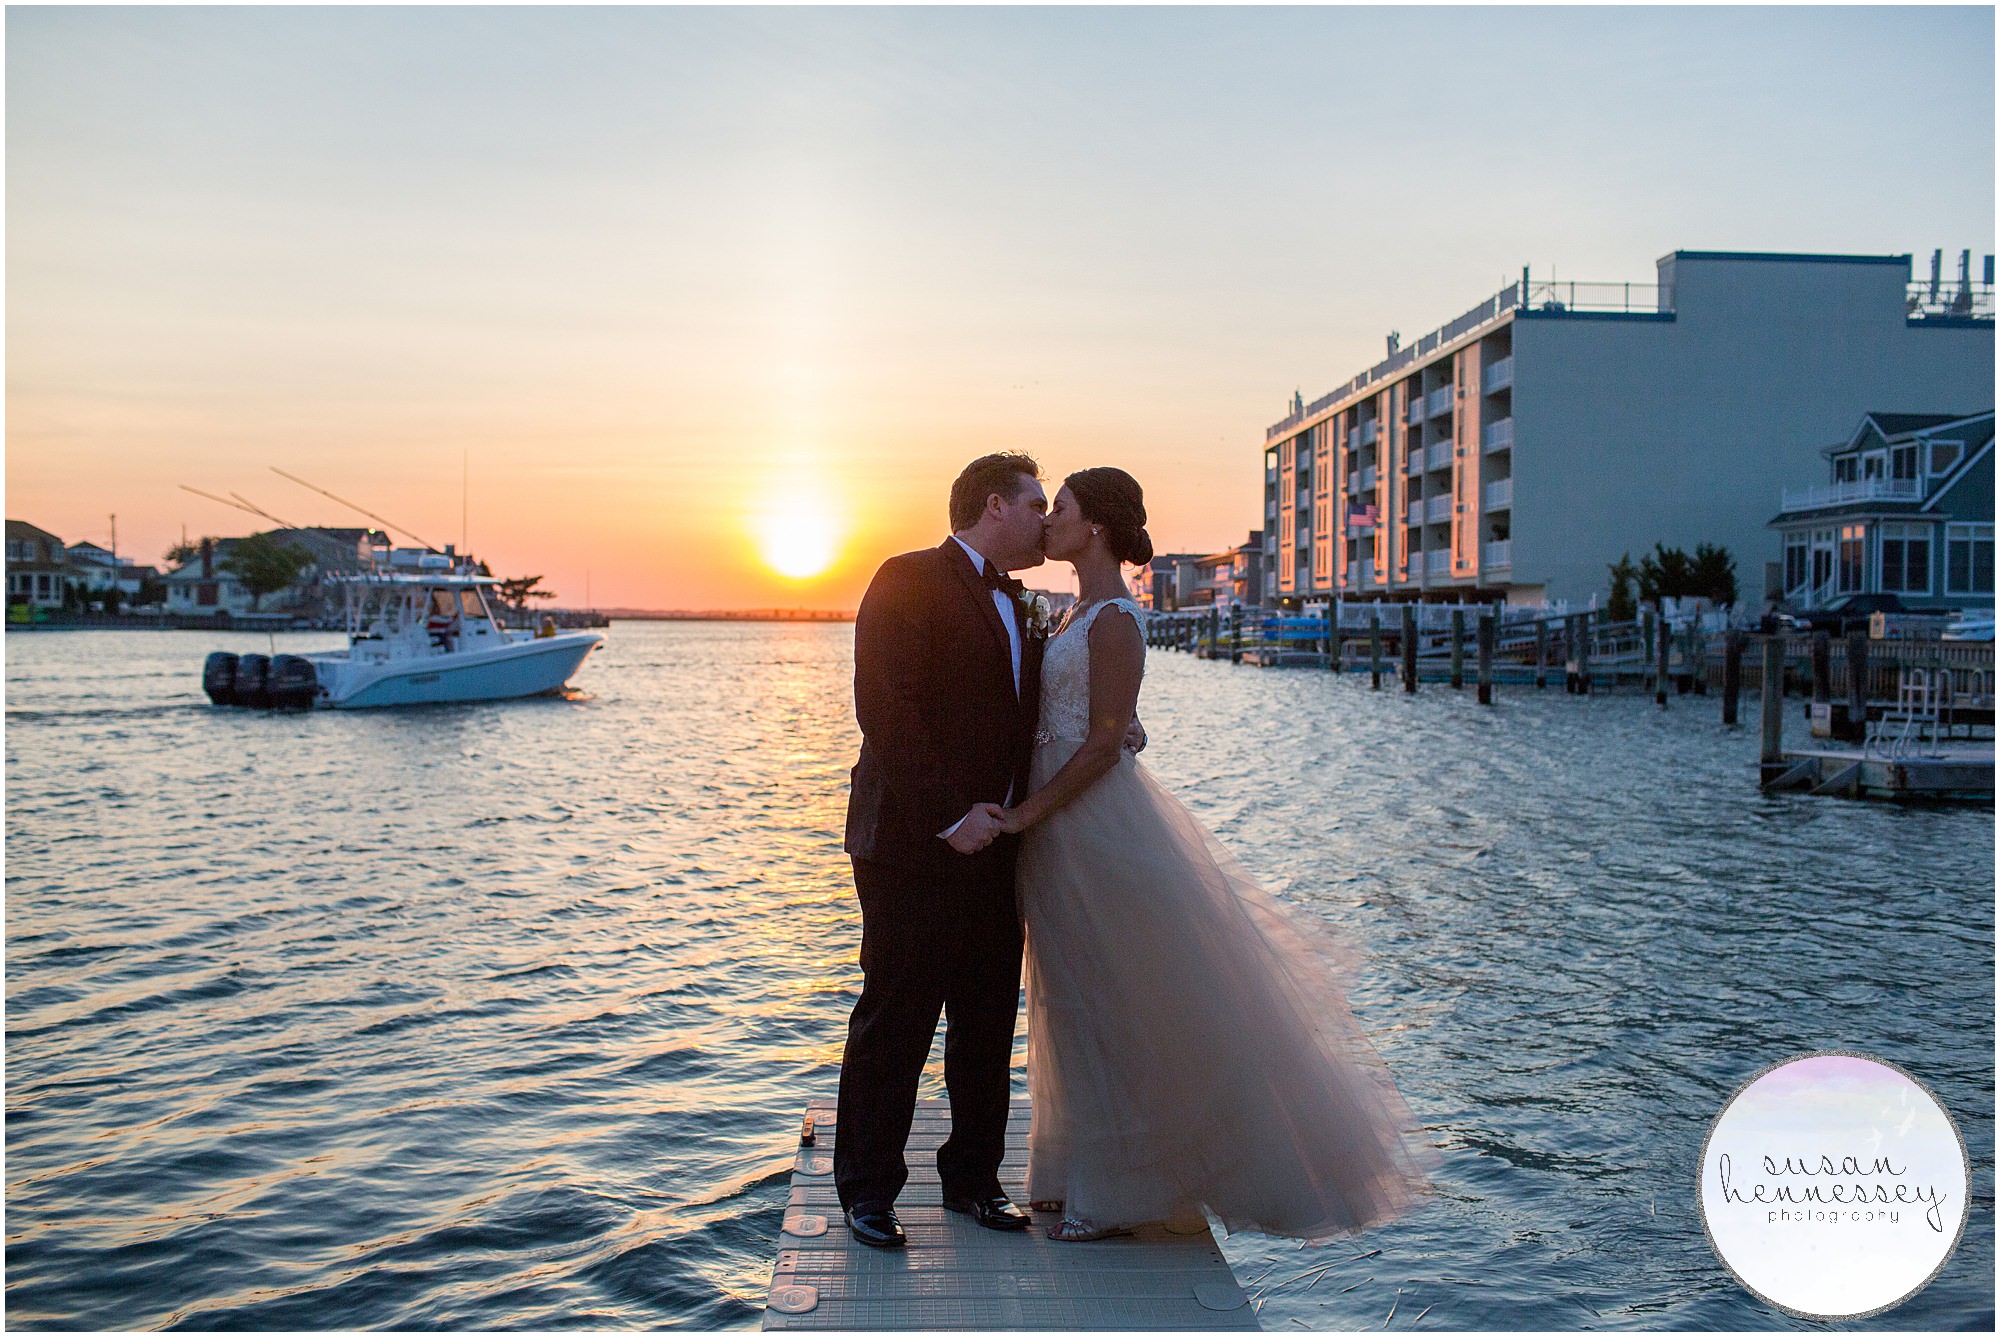 The sunset over the bay at the Reeds at Shelter Haven make it one of the best Jersey Shore wedding venues